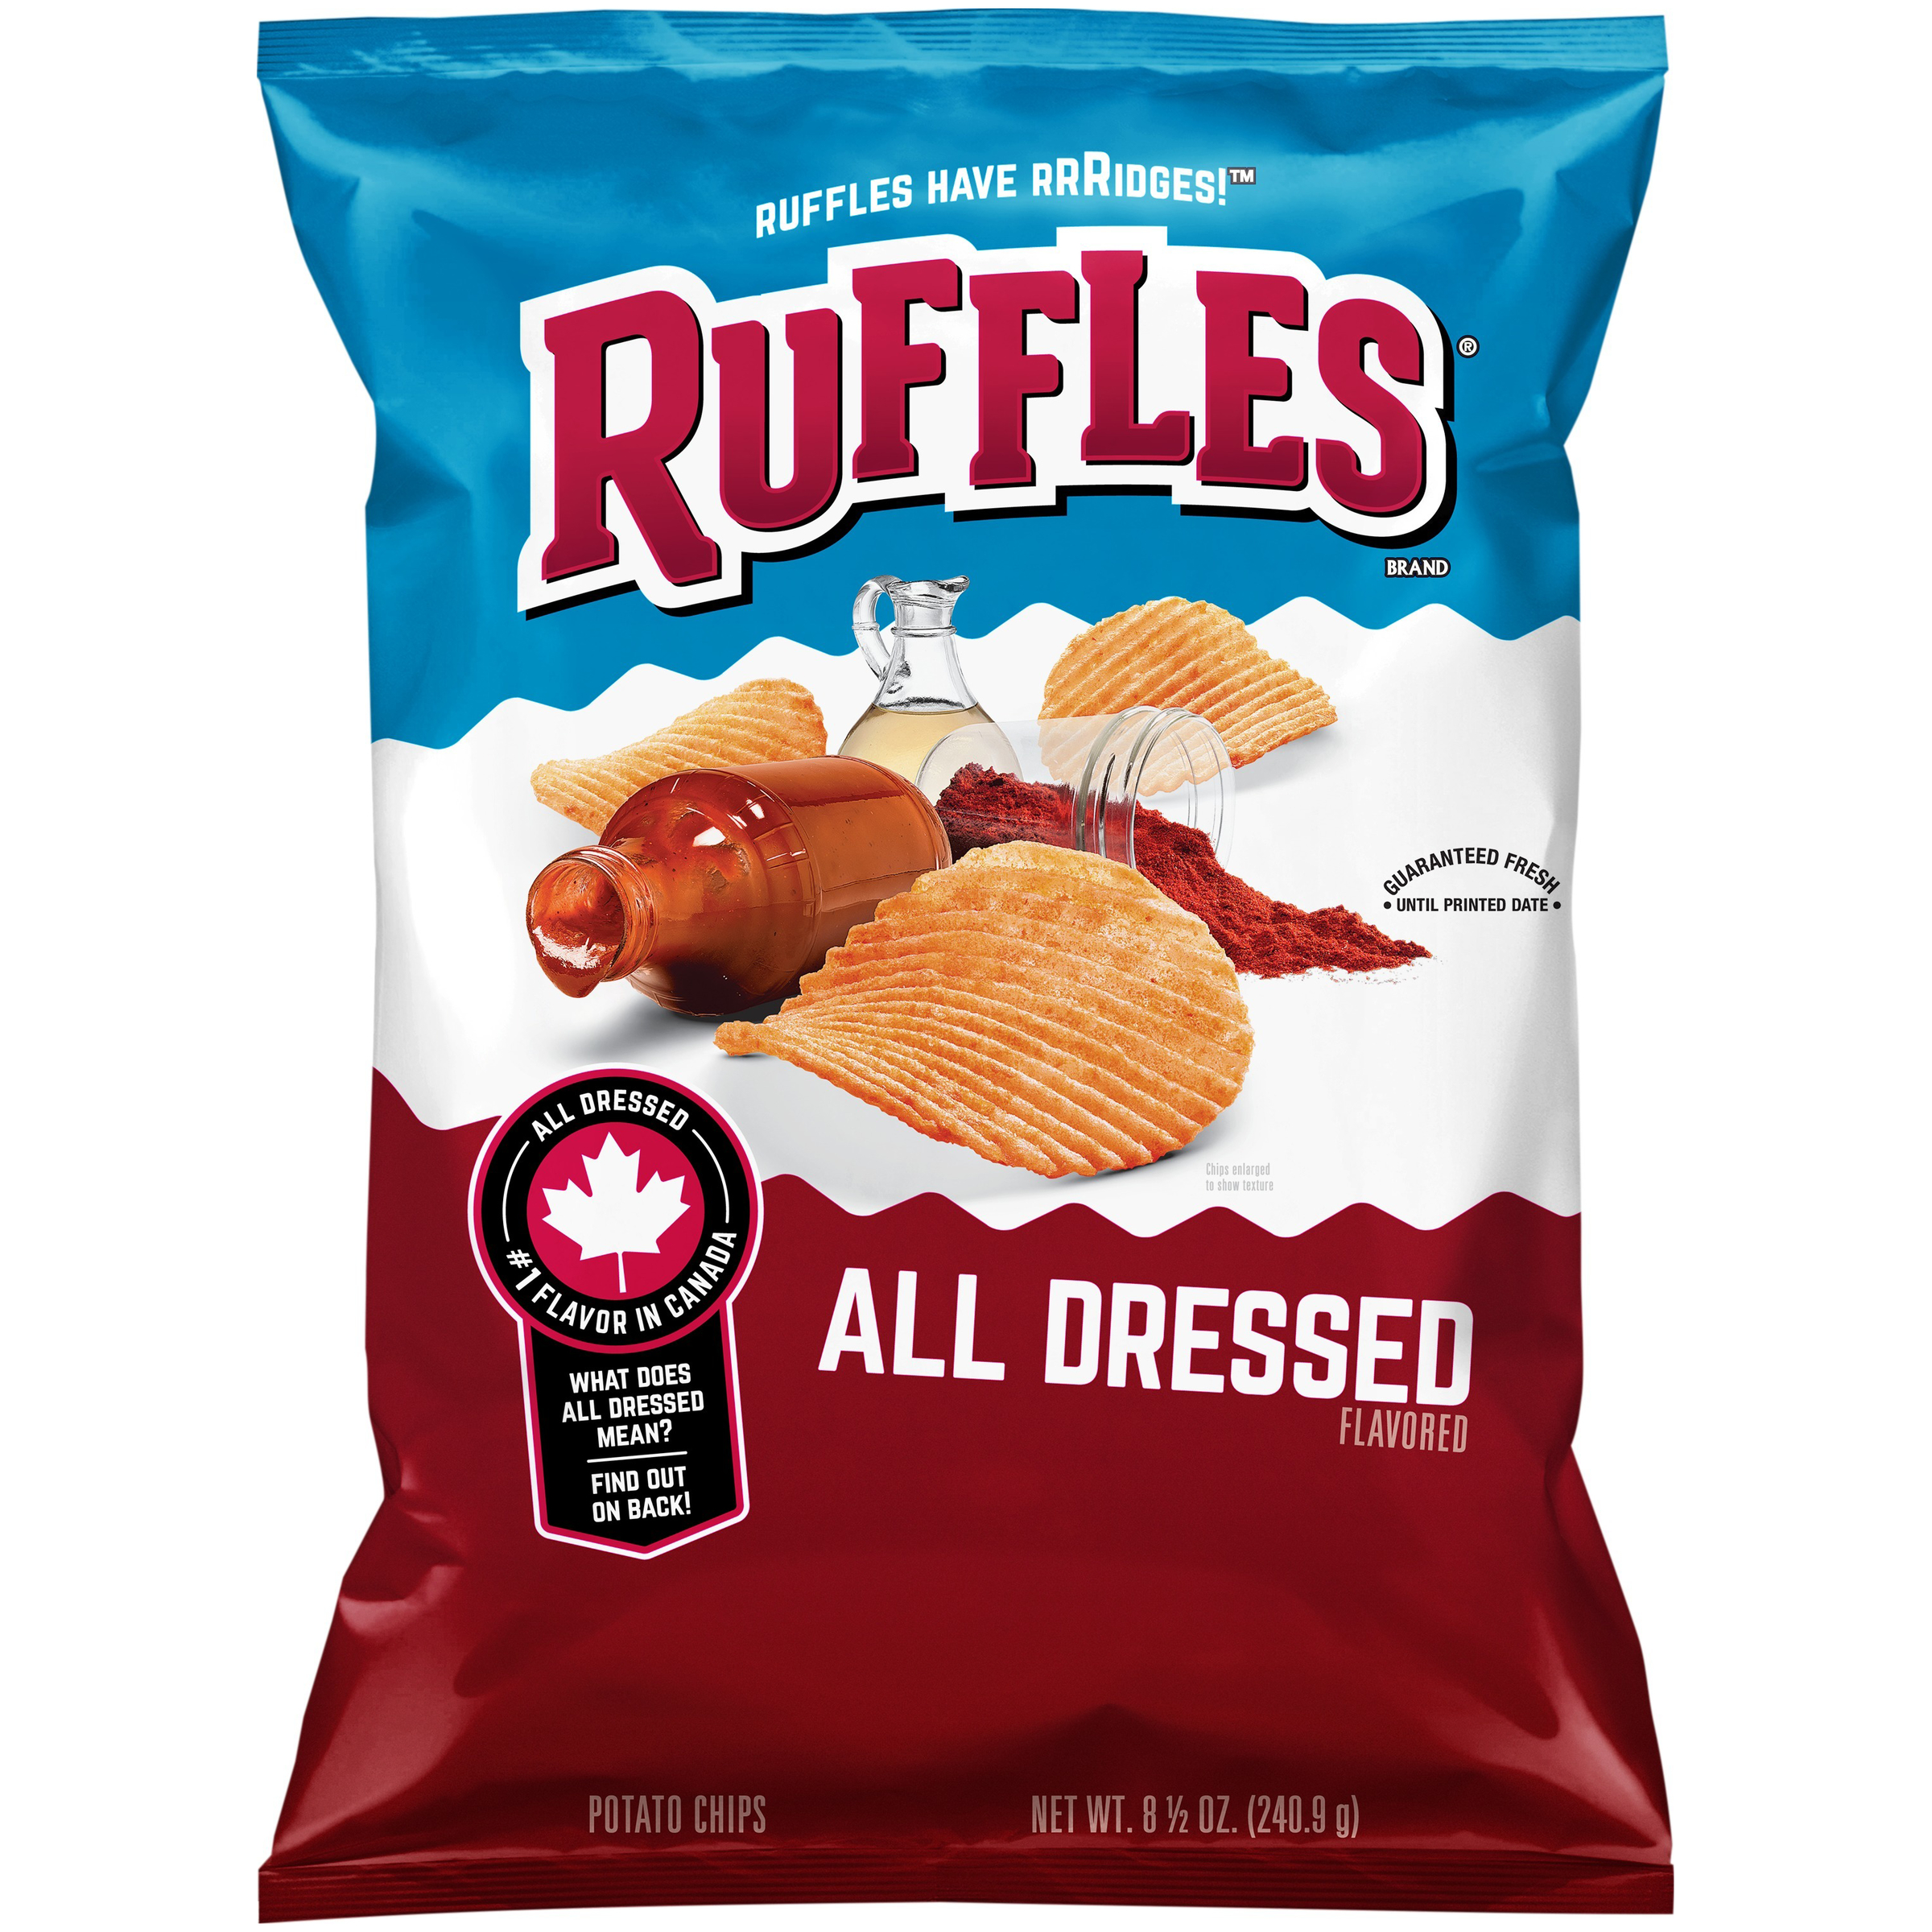 Ruffles All Dressed Flavored Potato Chips, 8.5 Oz.